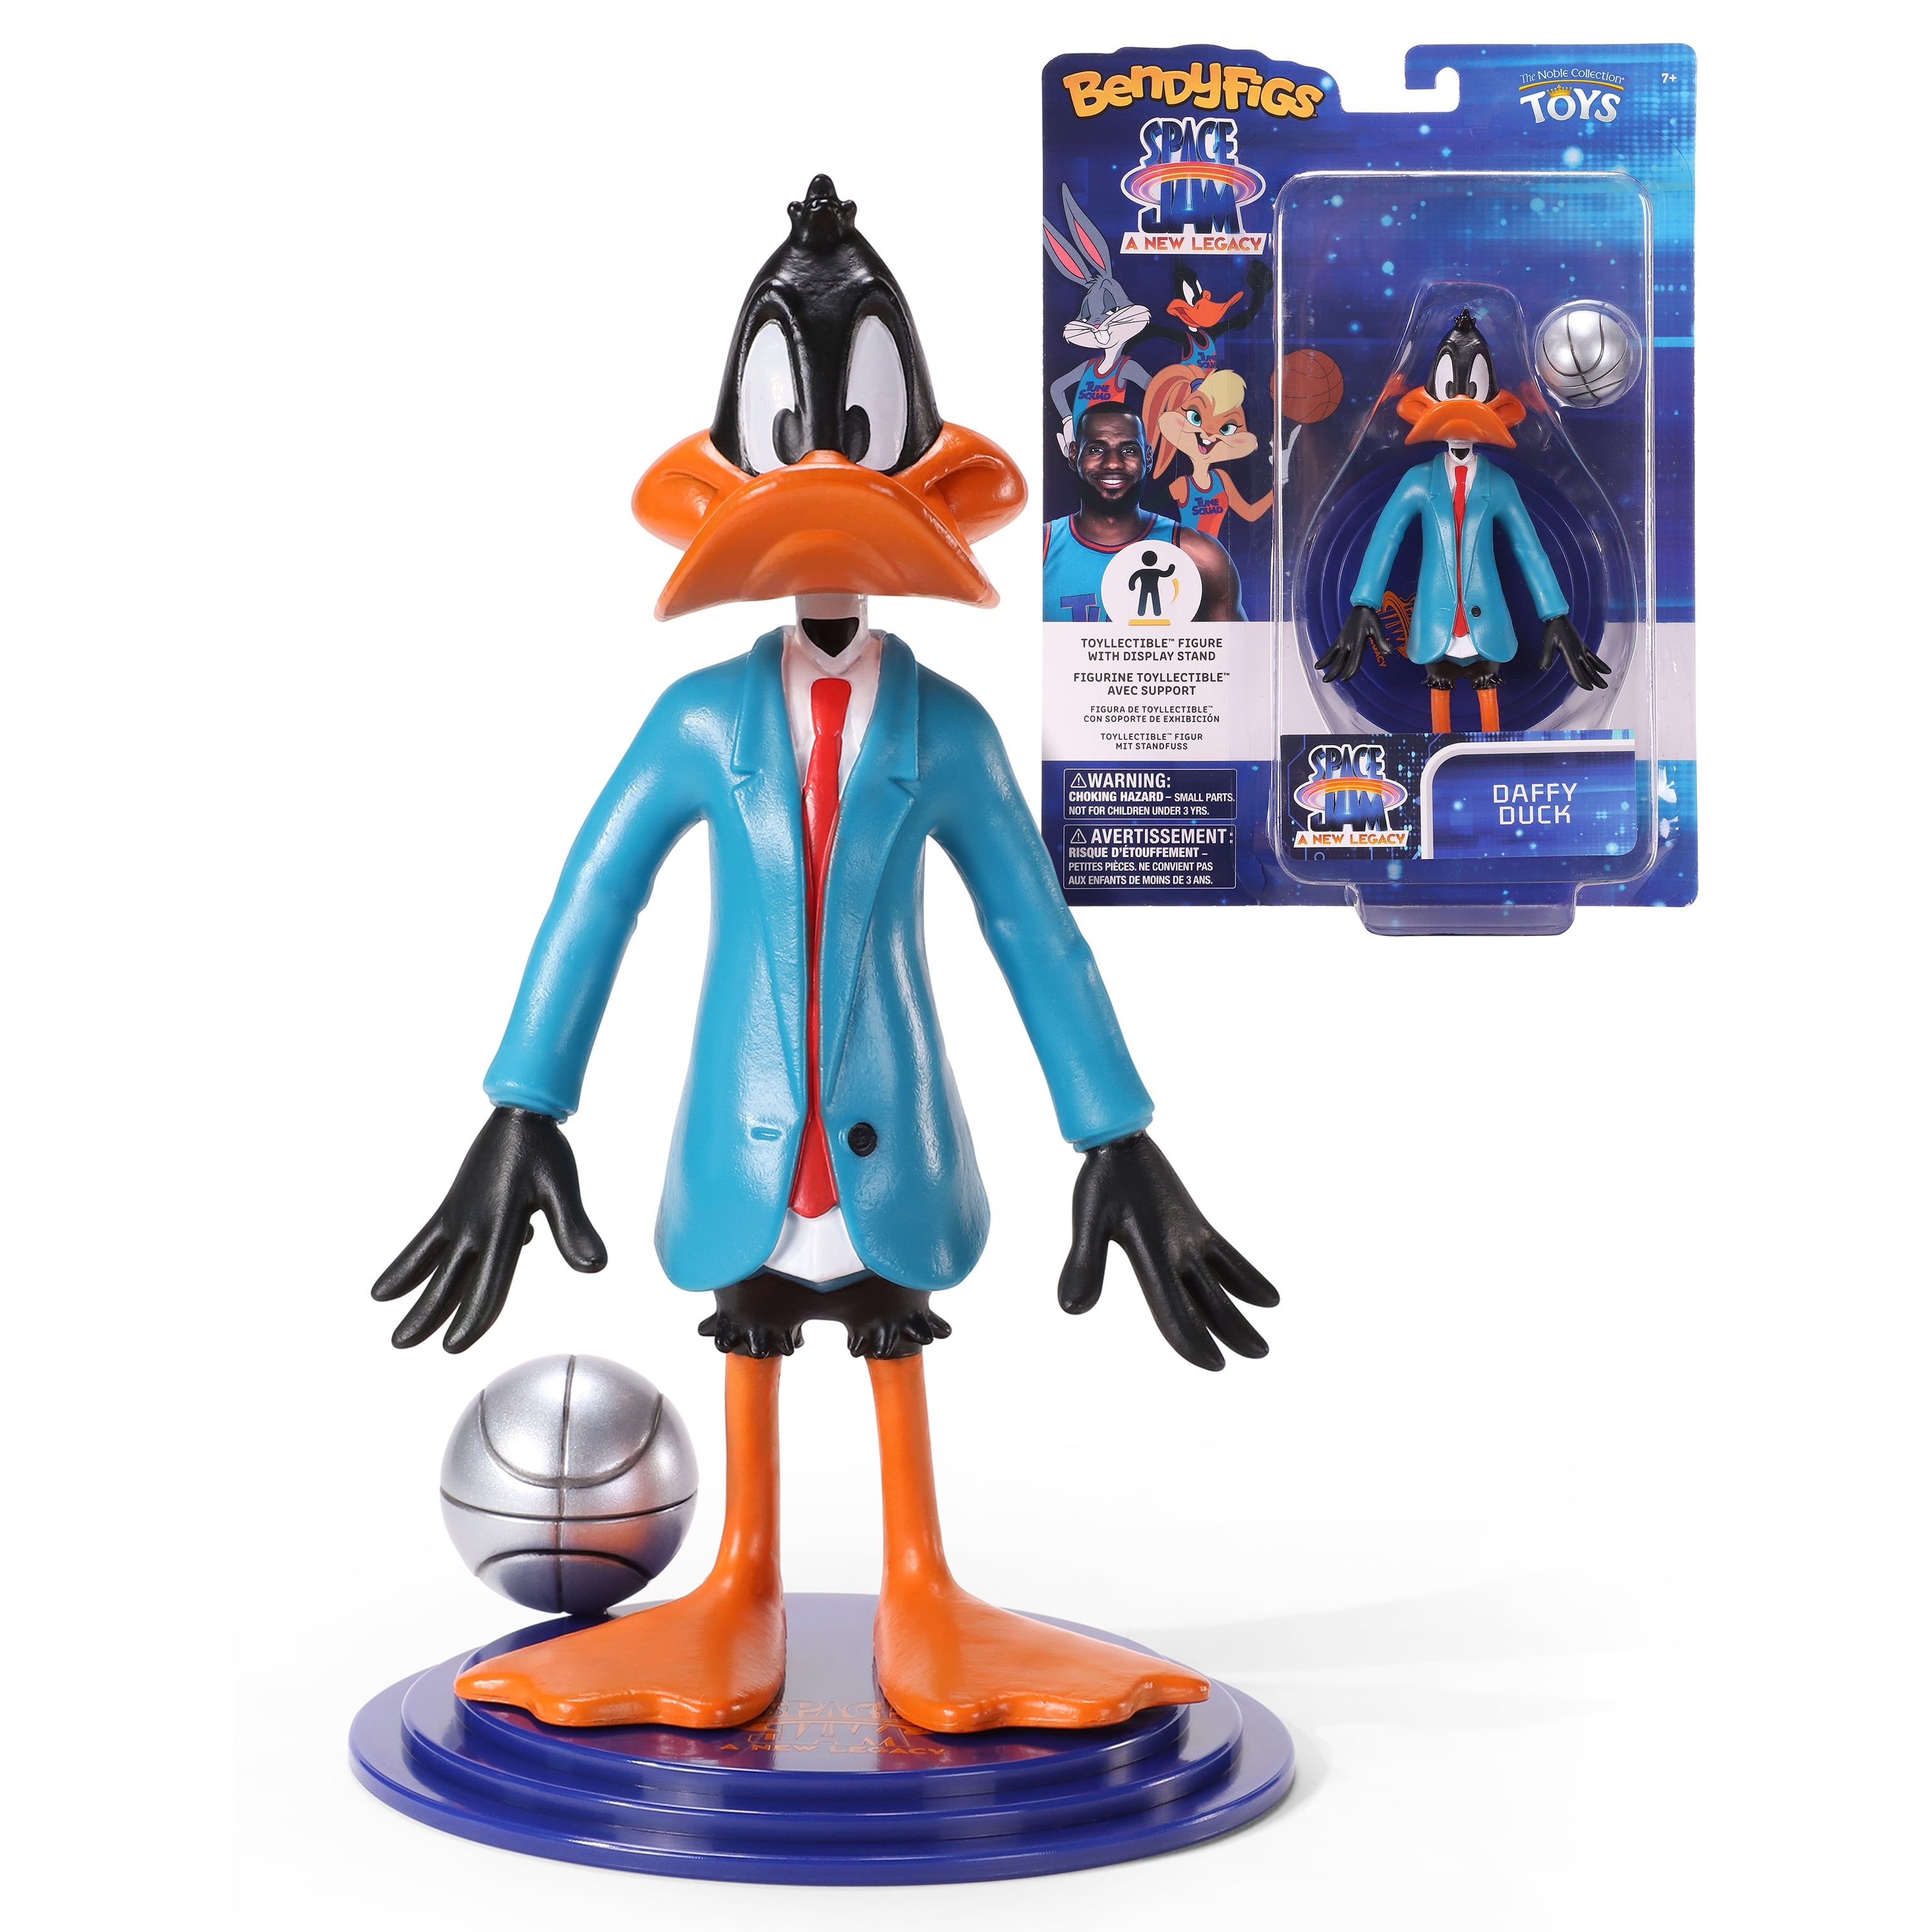 BendyFigs Space Jam A New Legacy Lebron James Collectible Figure